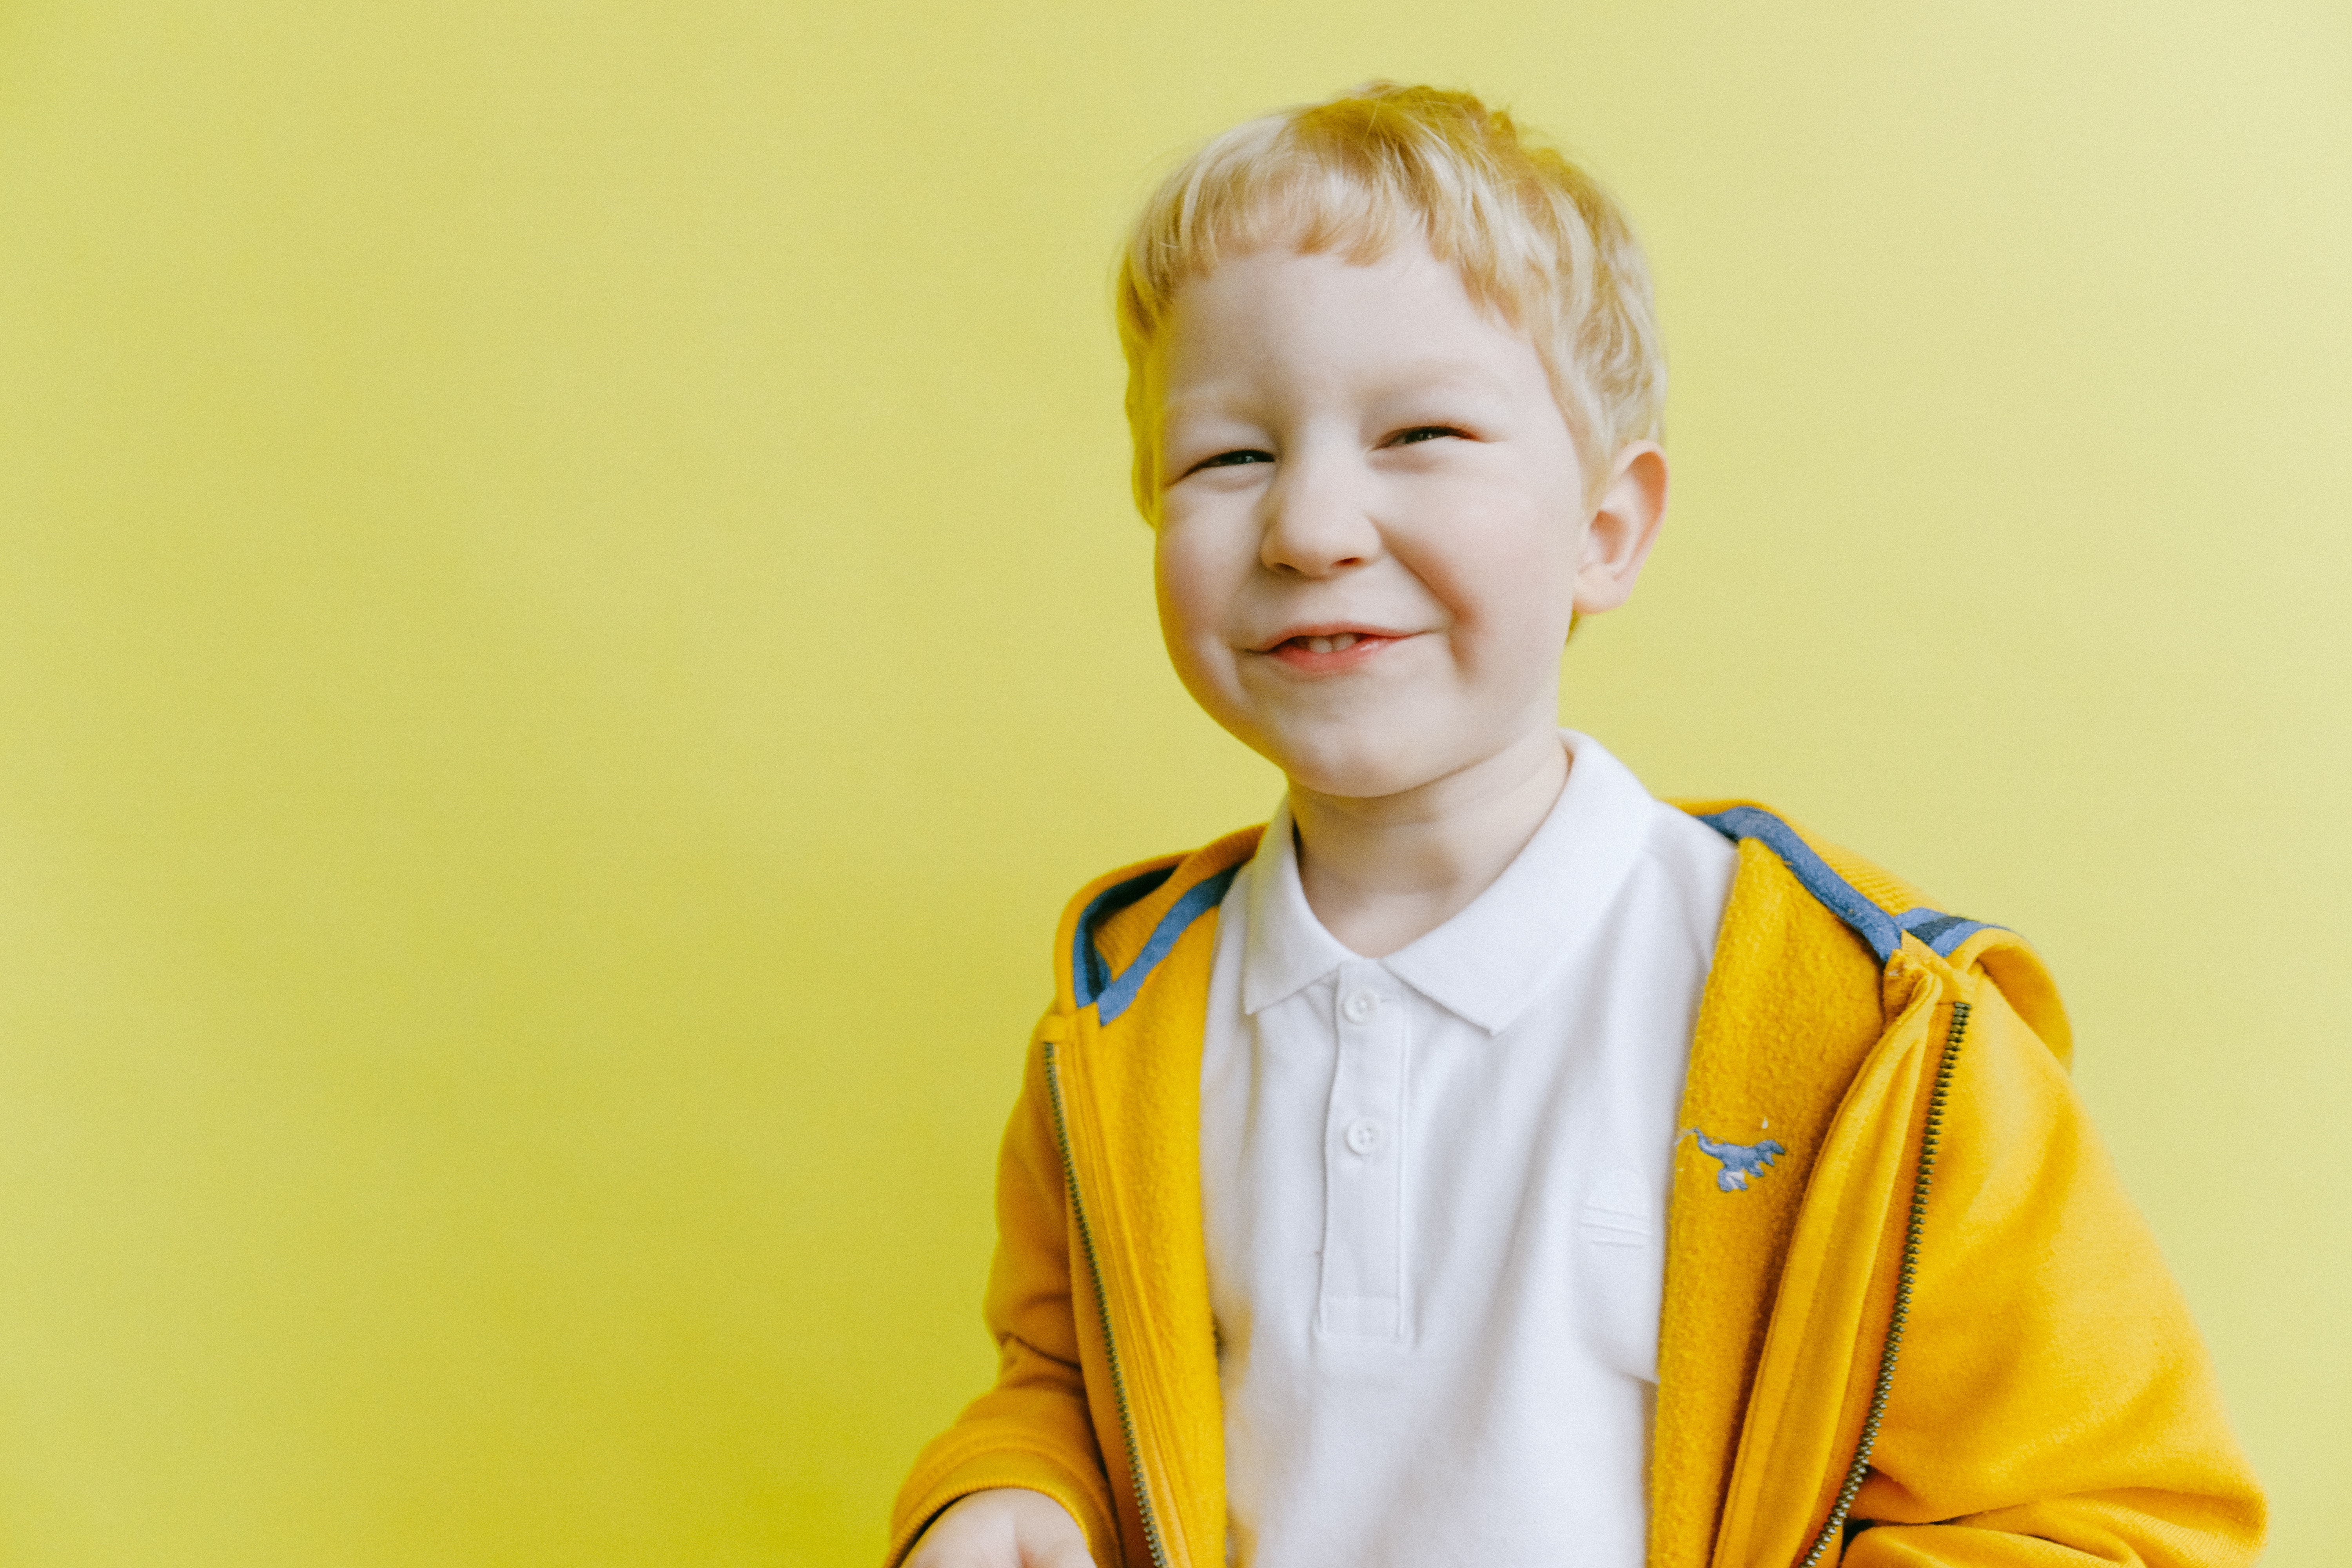 A happy looking child wearing yellow